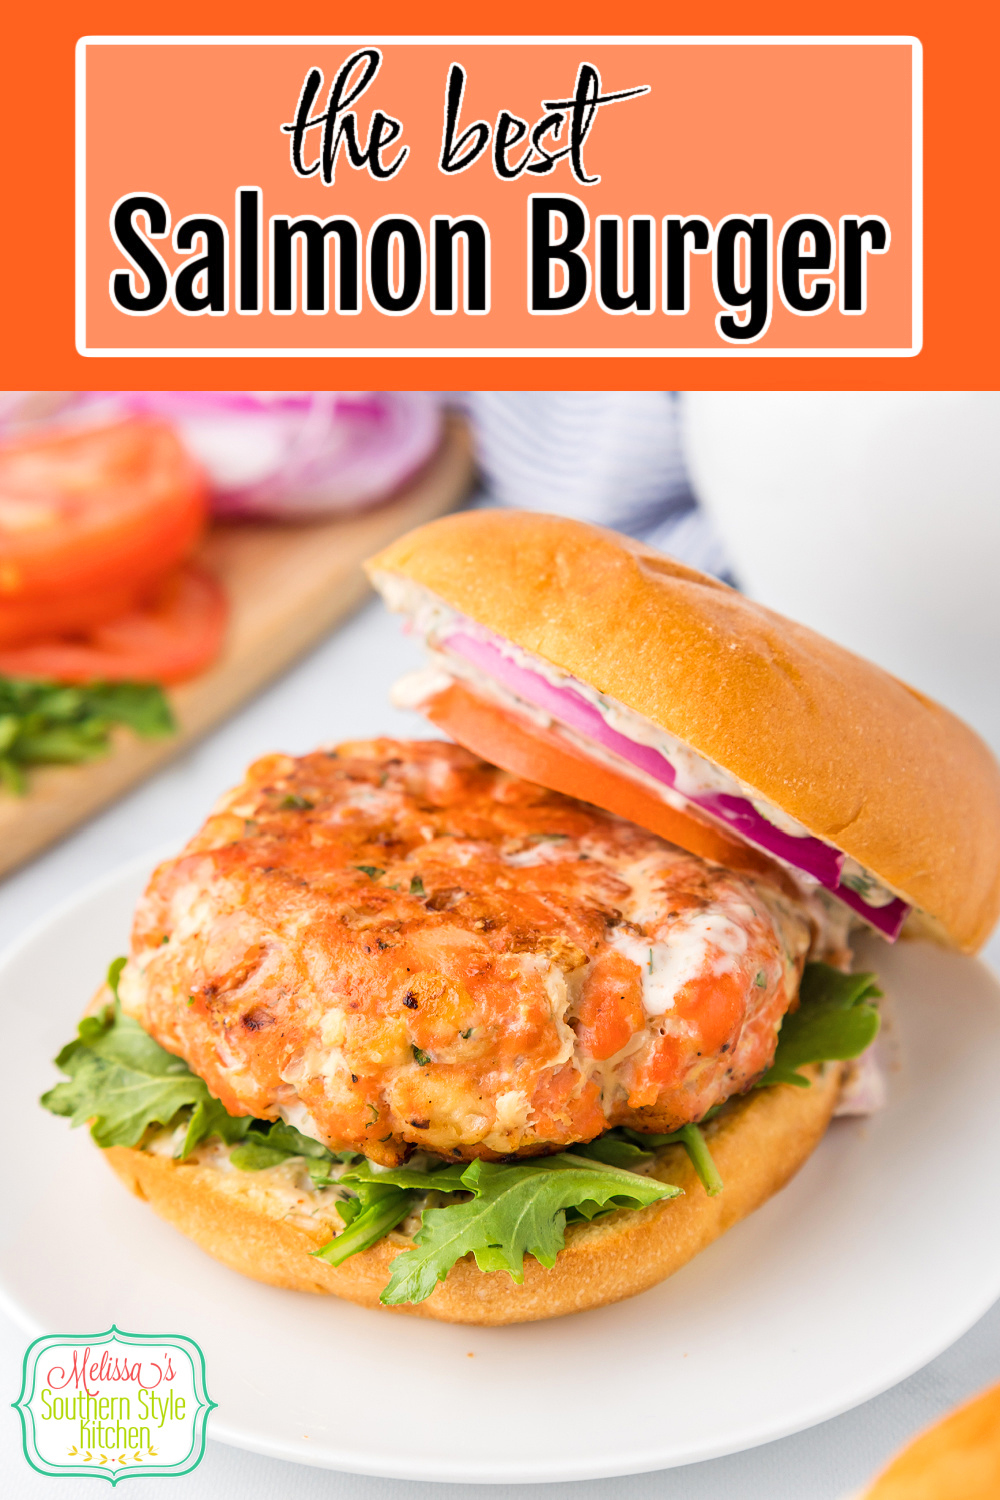 Upgrade your burger menu with this Salmon Burger recipe served on toasted buns with fresh toppings and drizzled with a remoulade sauce. #salmonrecipes #salmonburgers #easyburgerrecipes #grilledsalmon #freshsalmonrecipes via @melissasssk